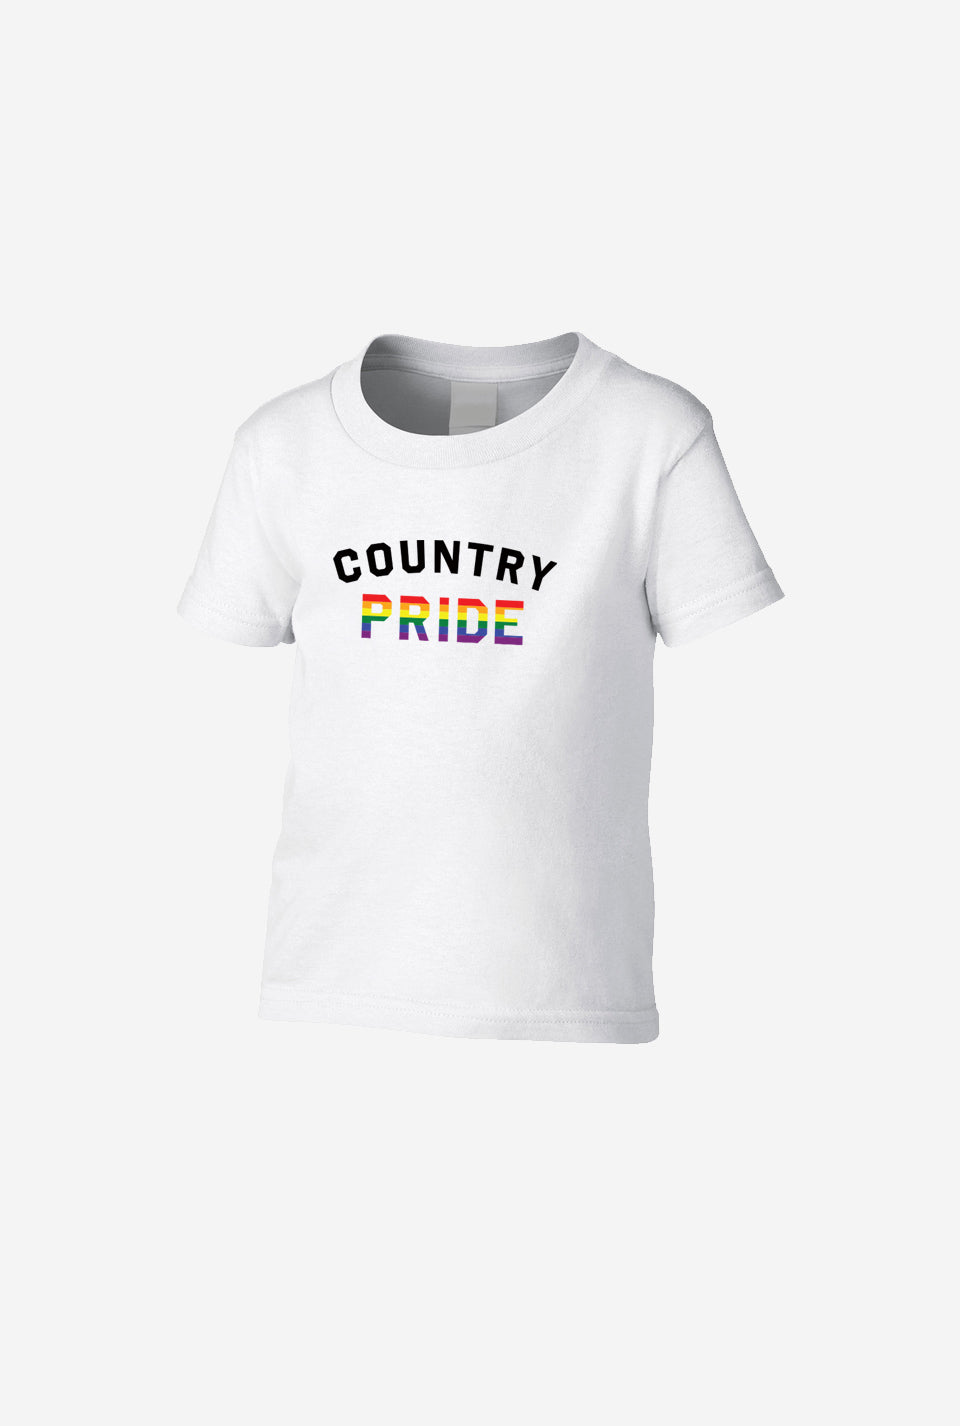 Country Pride Toddler T-Shirt - White